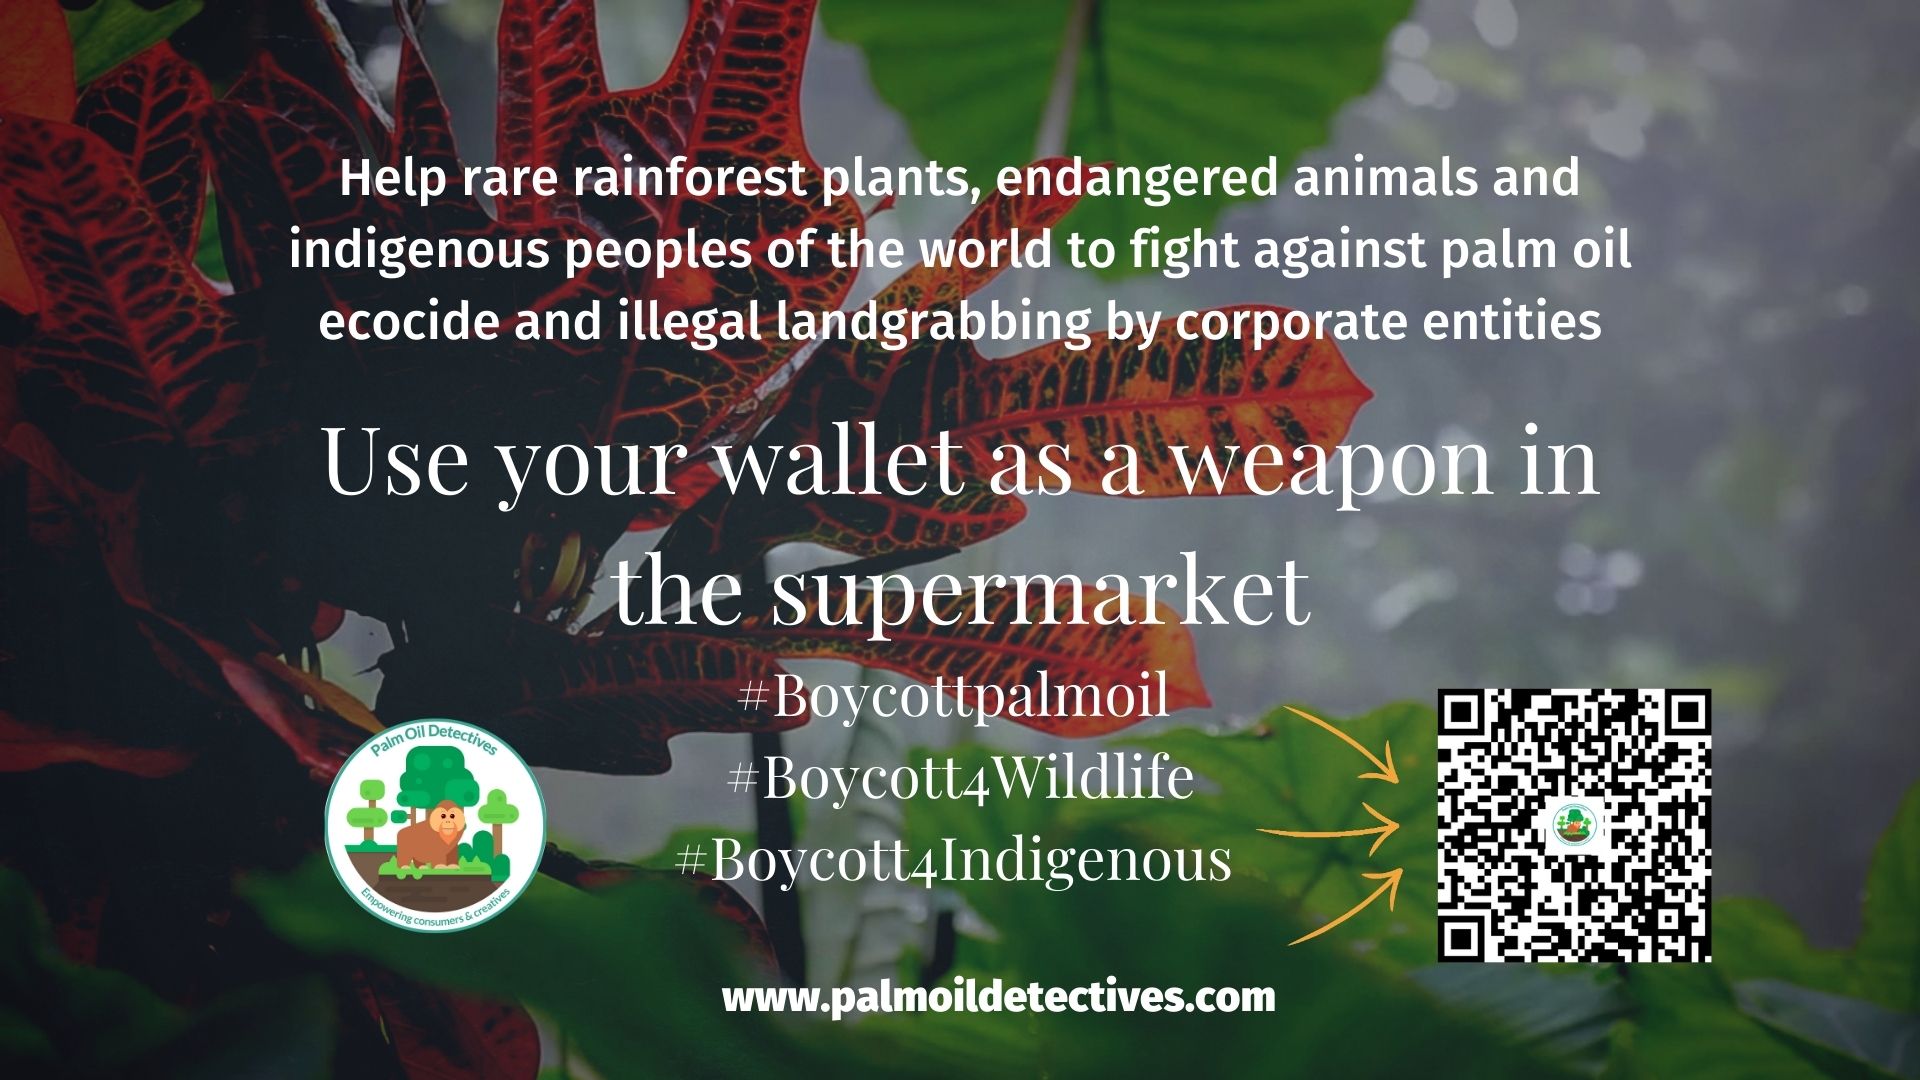 100 NGOS sign a public statement denouncing the RSPO and "sustainable" palm oil as a fake solution that does not stop deforestation